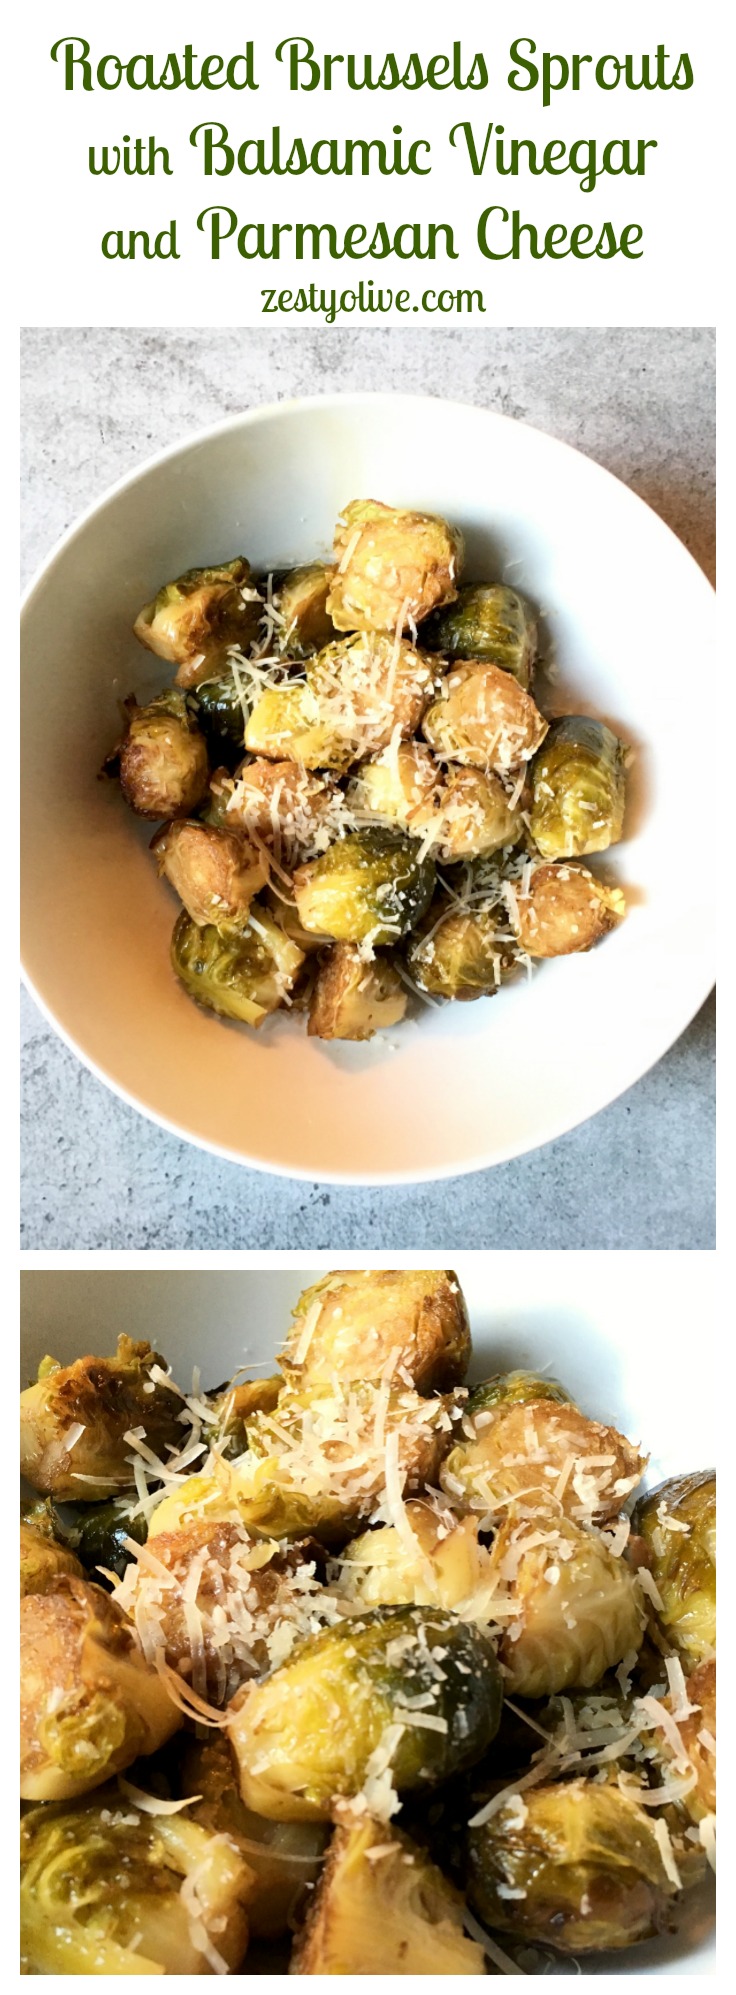 Roasted Brussels Sprouts With Balsamic Vinegar And Parmesan Cheese ...